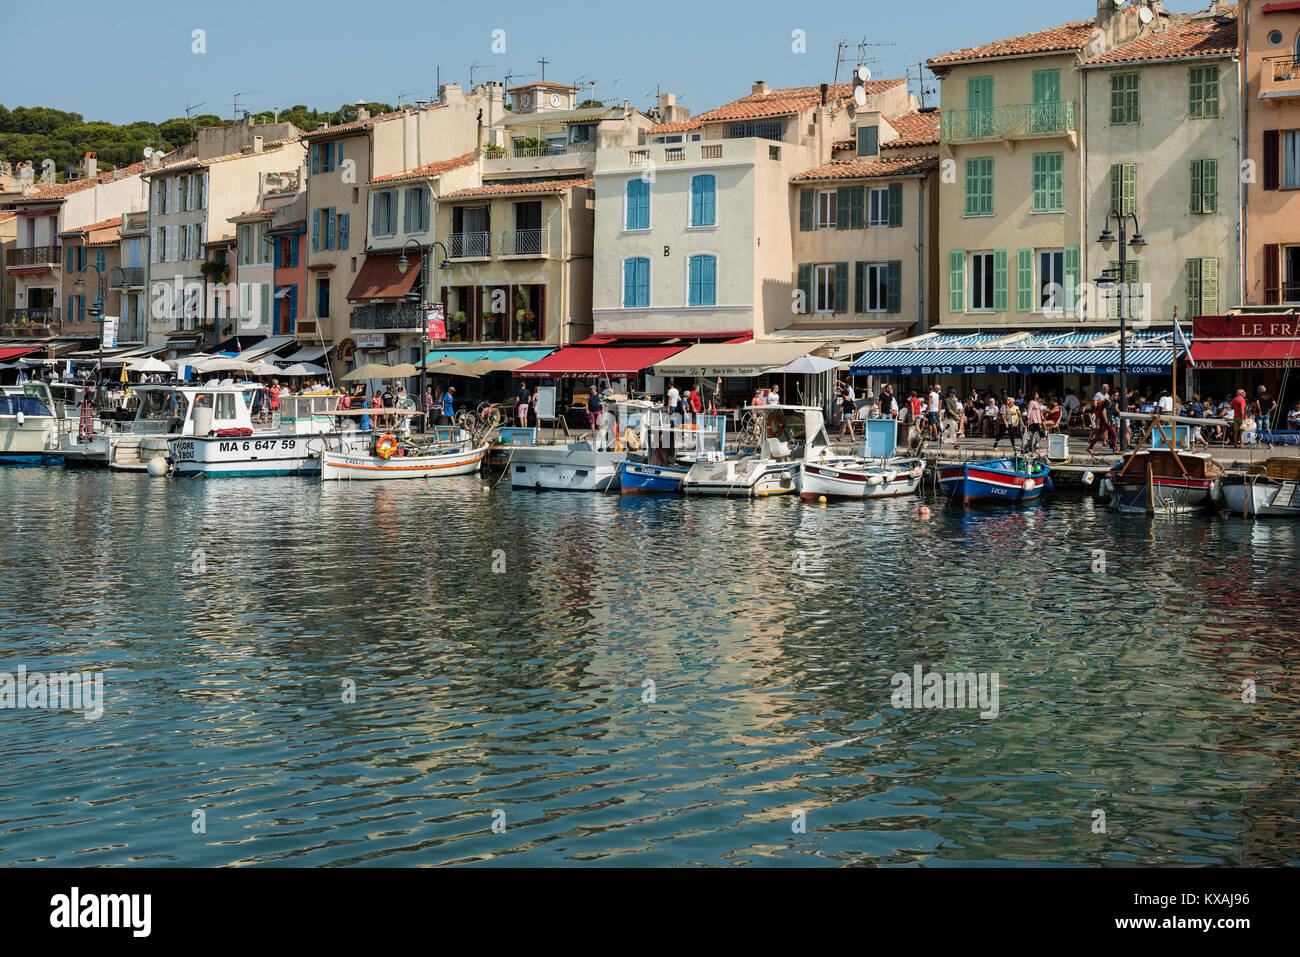 Row of houses at the harbour, Cassis, Bouches-du-Rhone, Provence-Alpes-Côte d' Azur, South of France, France Stock Photo